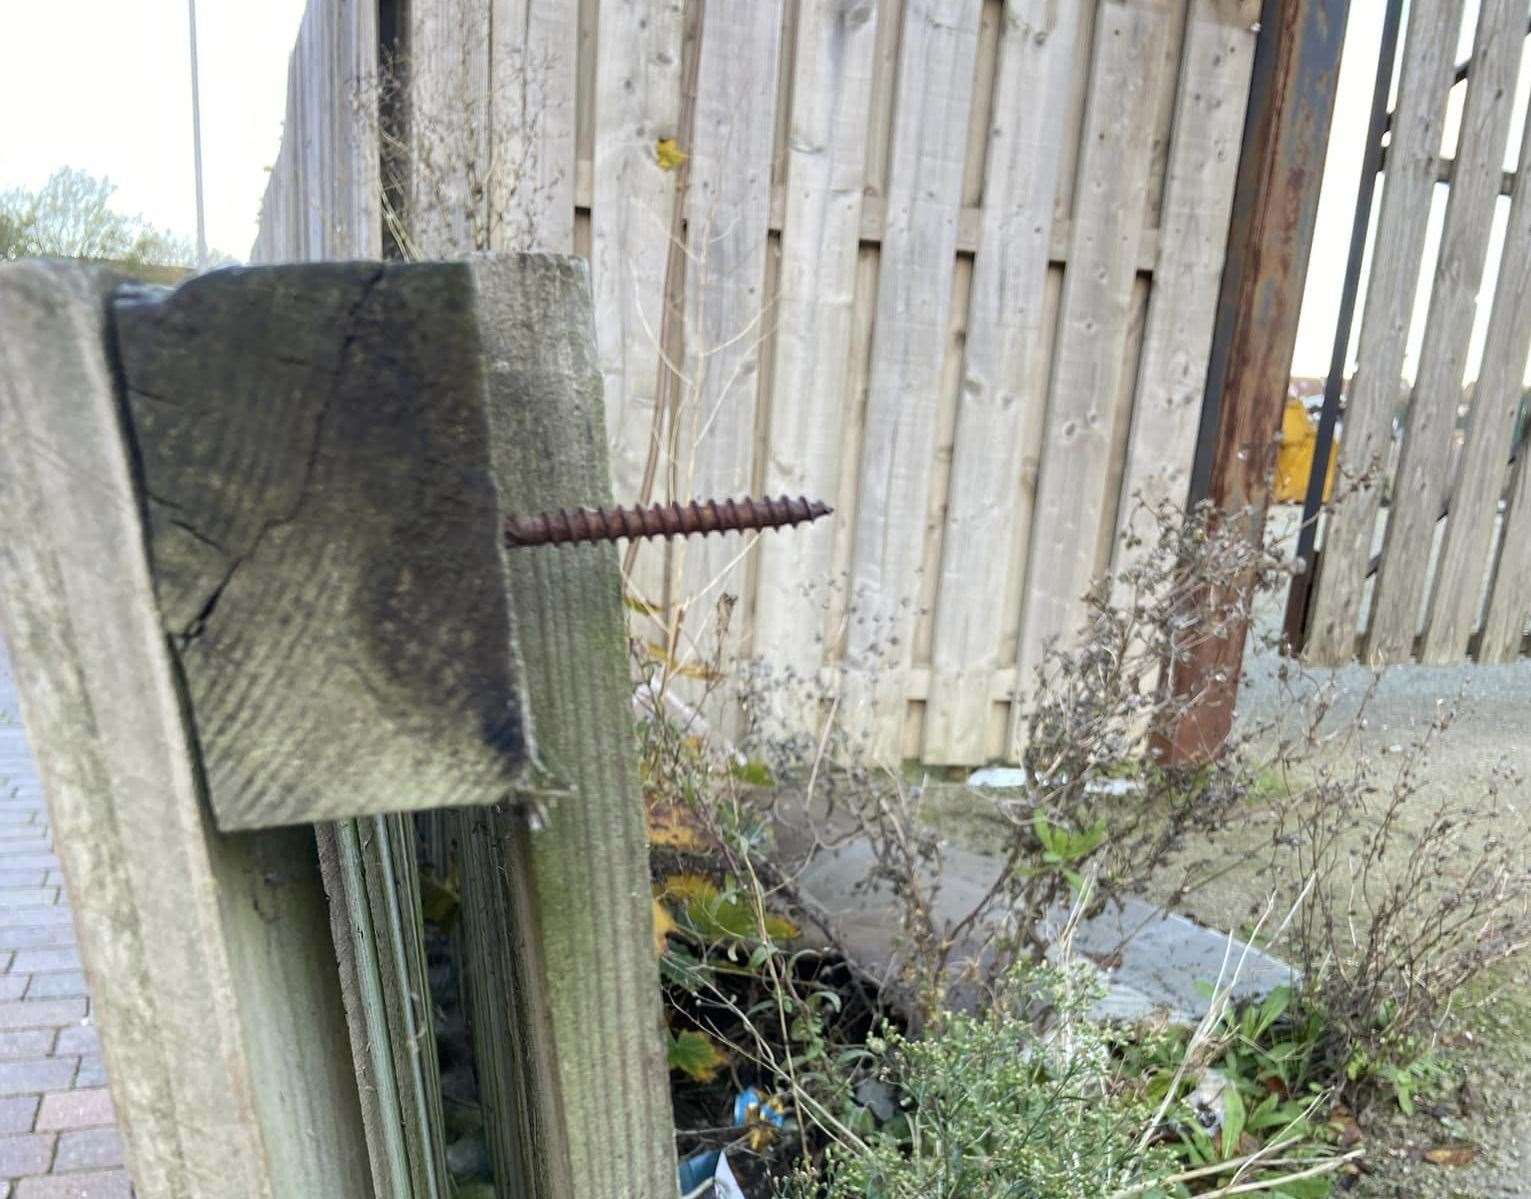 The exposed screw in Repton Park, Ashford. Picture: Sophie Howes